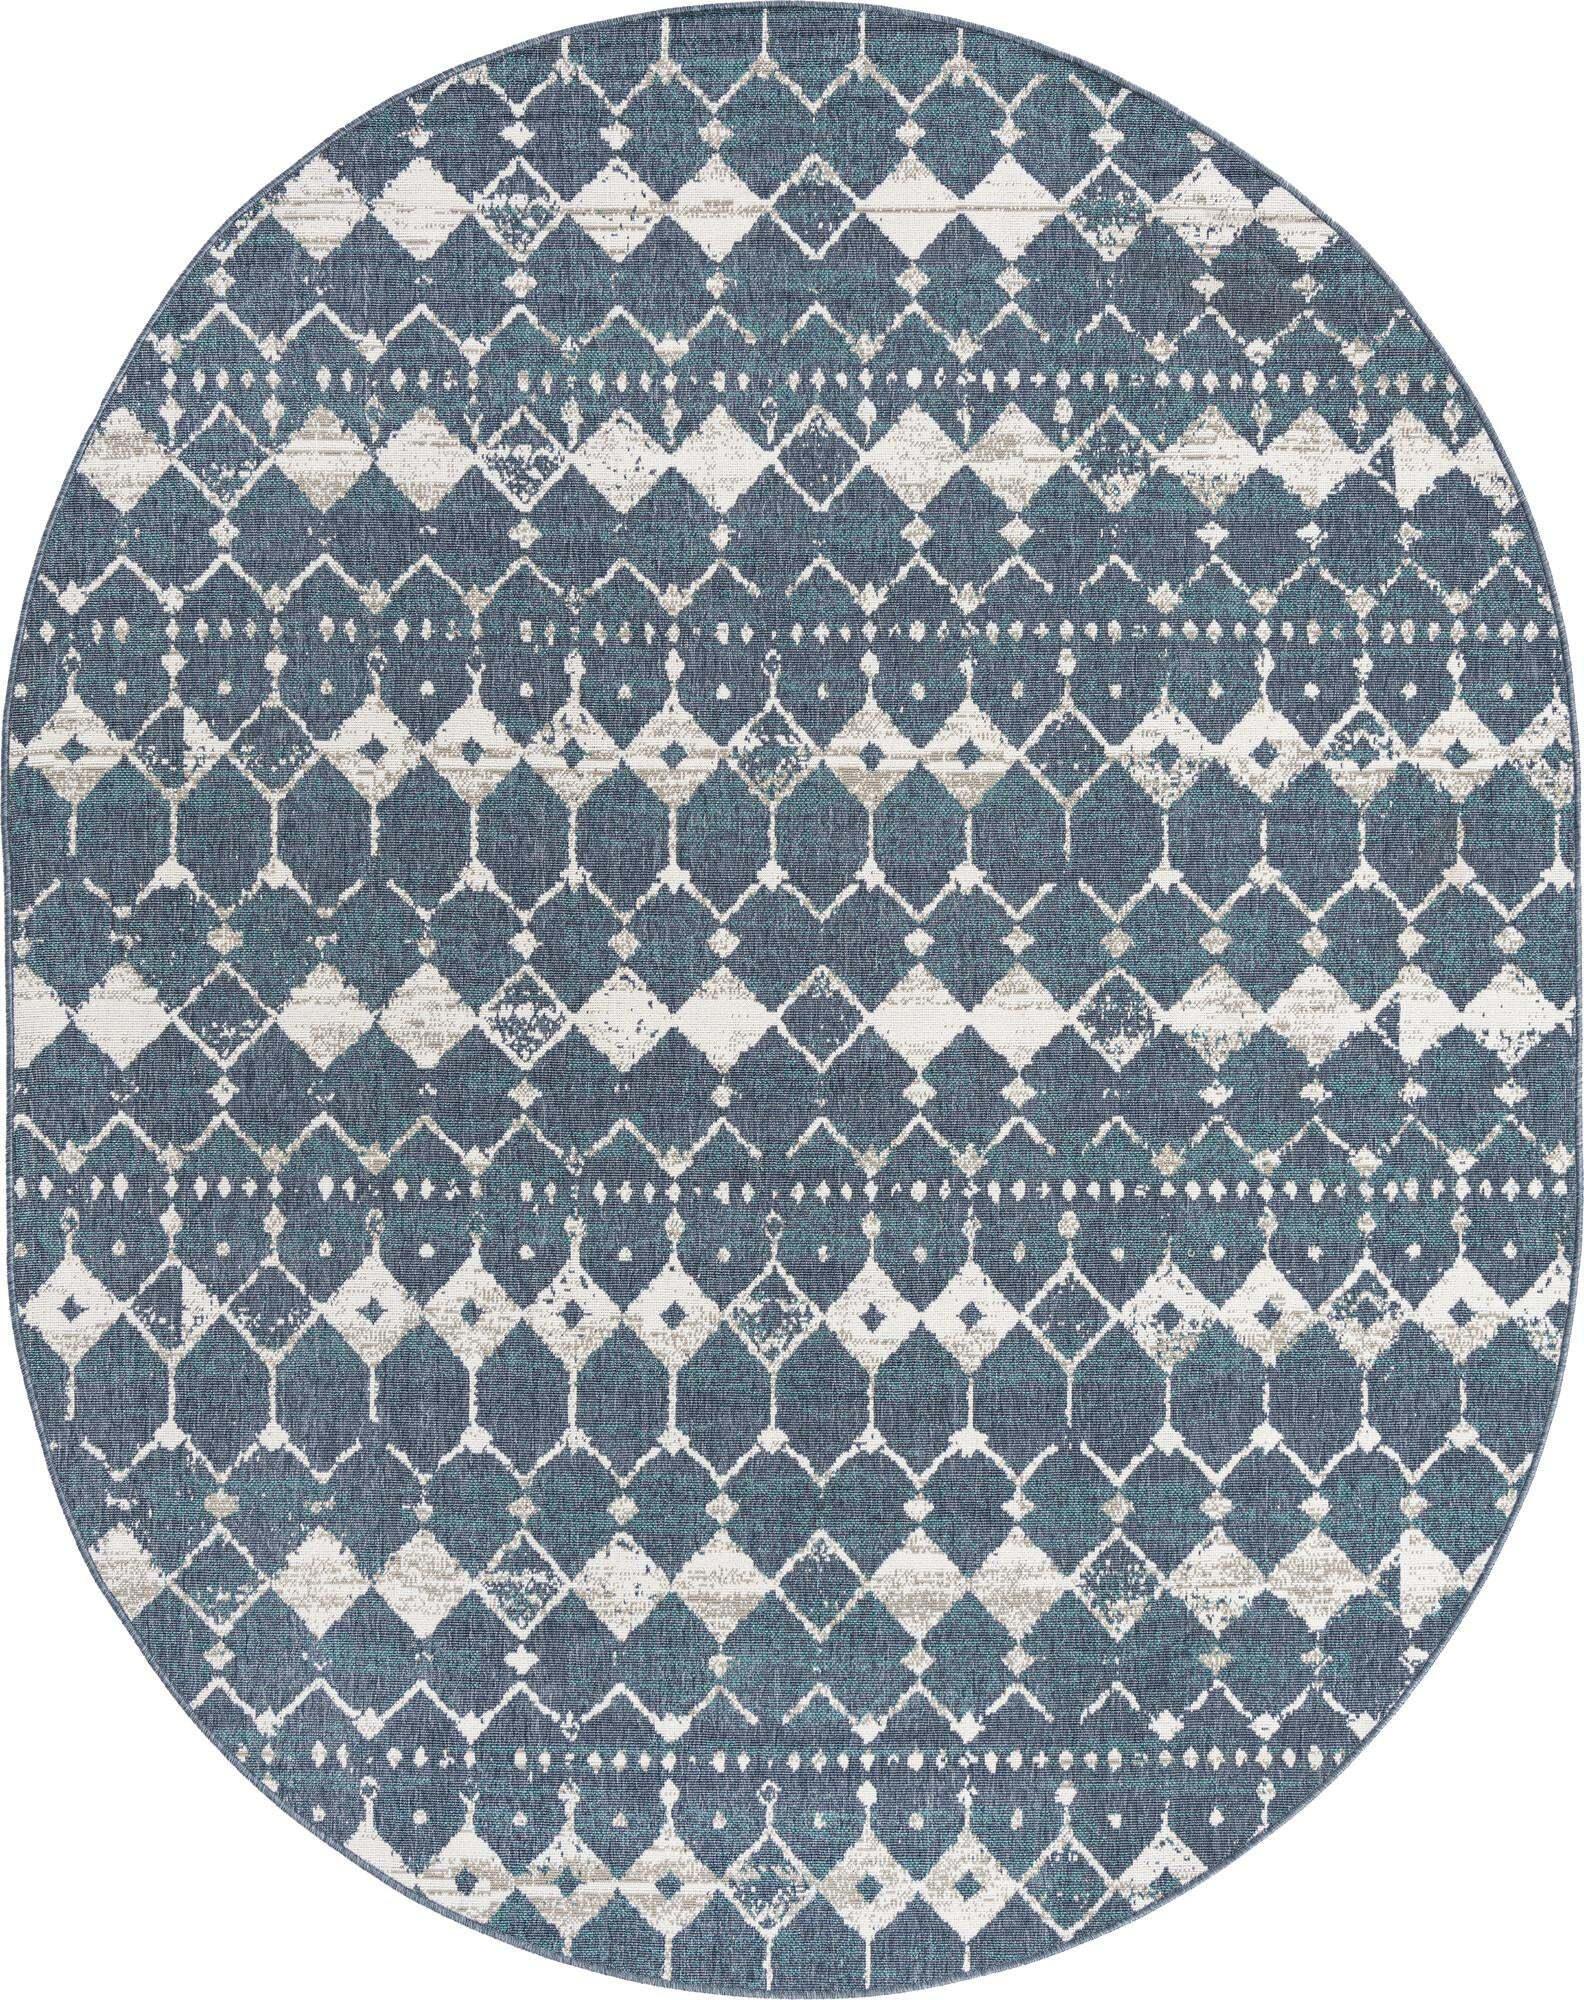 Unique Loom Outdoor Rugs - Outdoor Trellis Geometric Oval 8x10 Oval Rug Navy Blue & Ivory